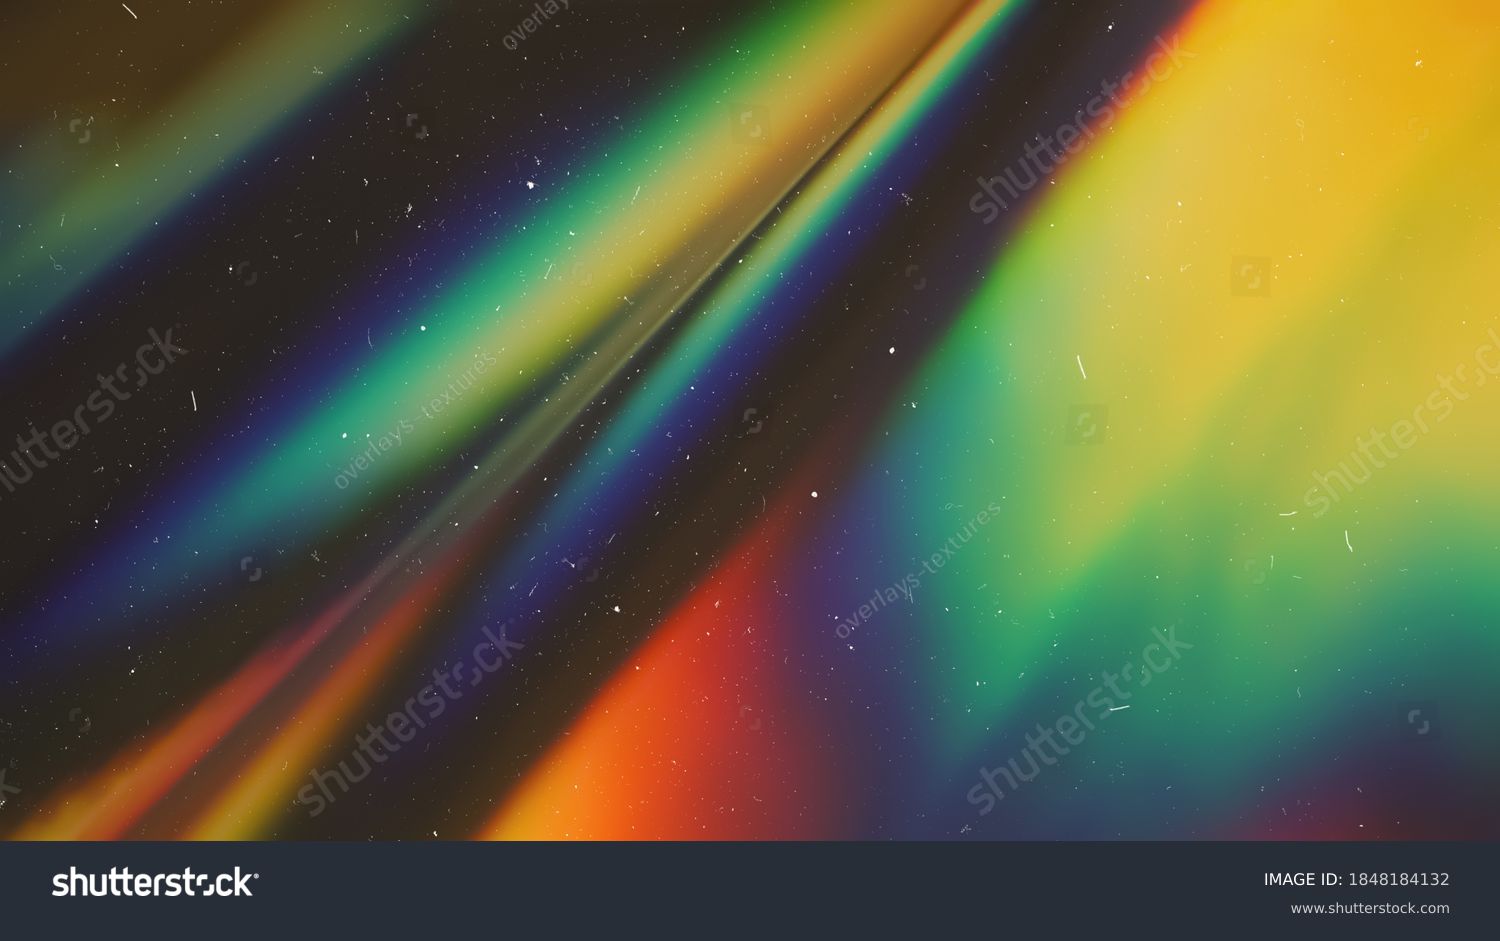 Dusted Holographic Abstract Multicolored Backgound Photo Overlay, Screen Mode for Vintage Retro Looking, Rainbow Light Leaks Prism Colors, Trend Design Creative Defocused Effect, Blurred Glow Vintage  #1848184132